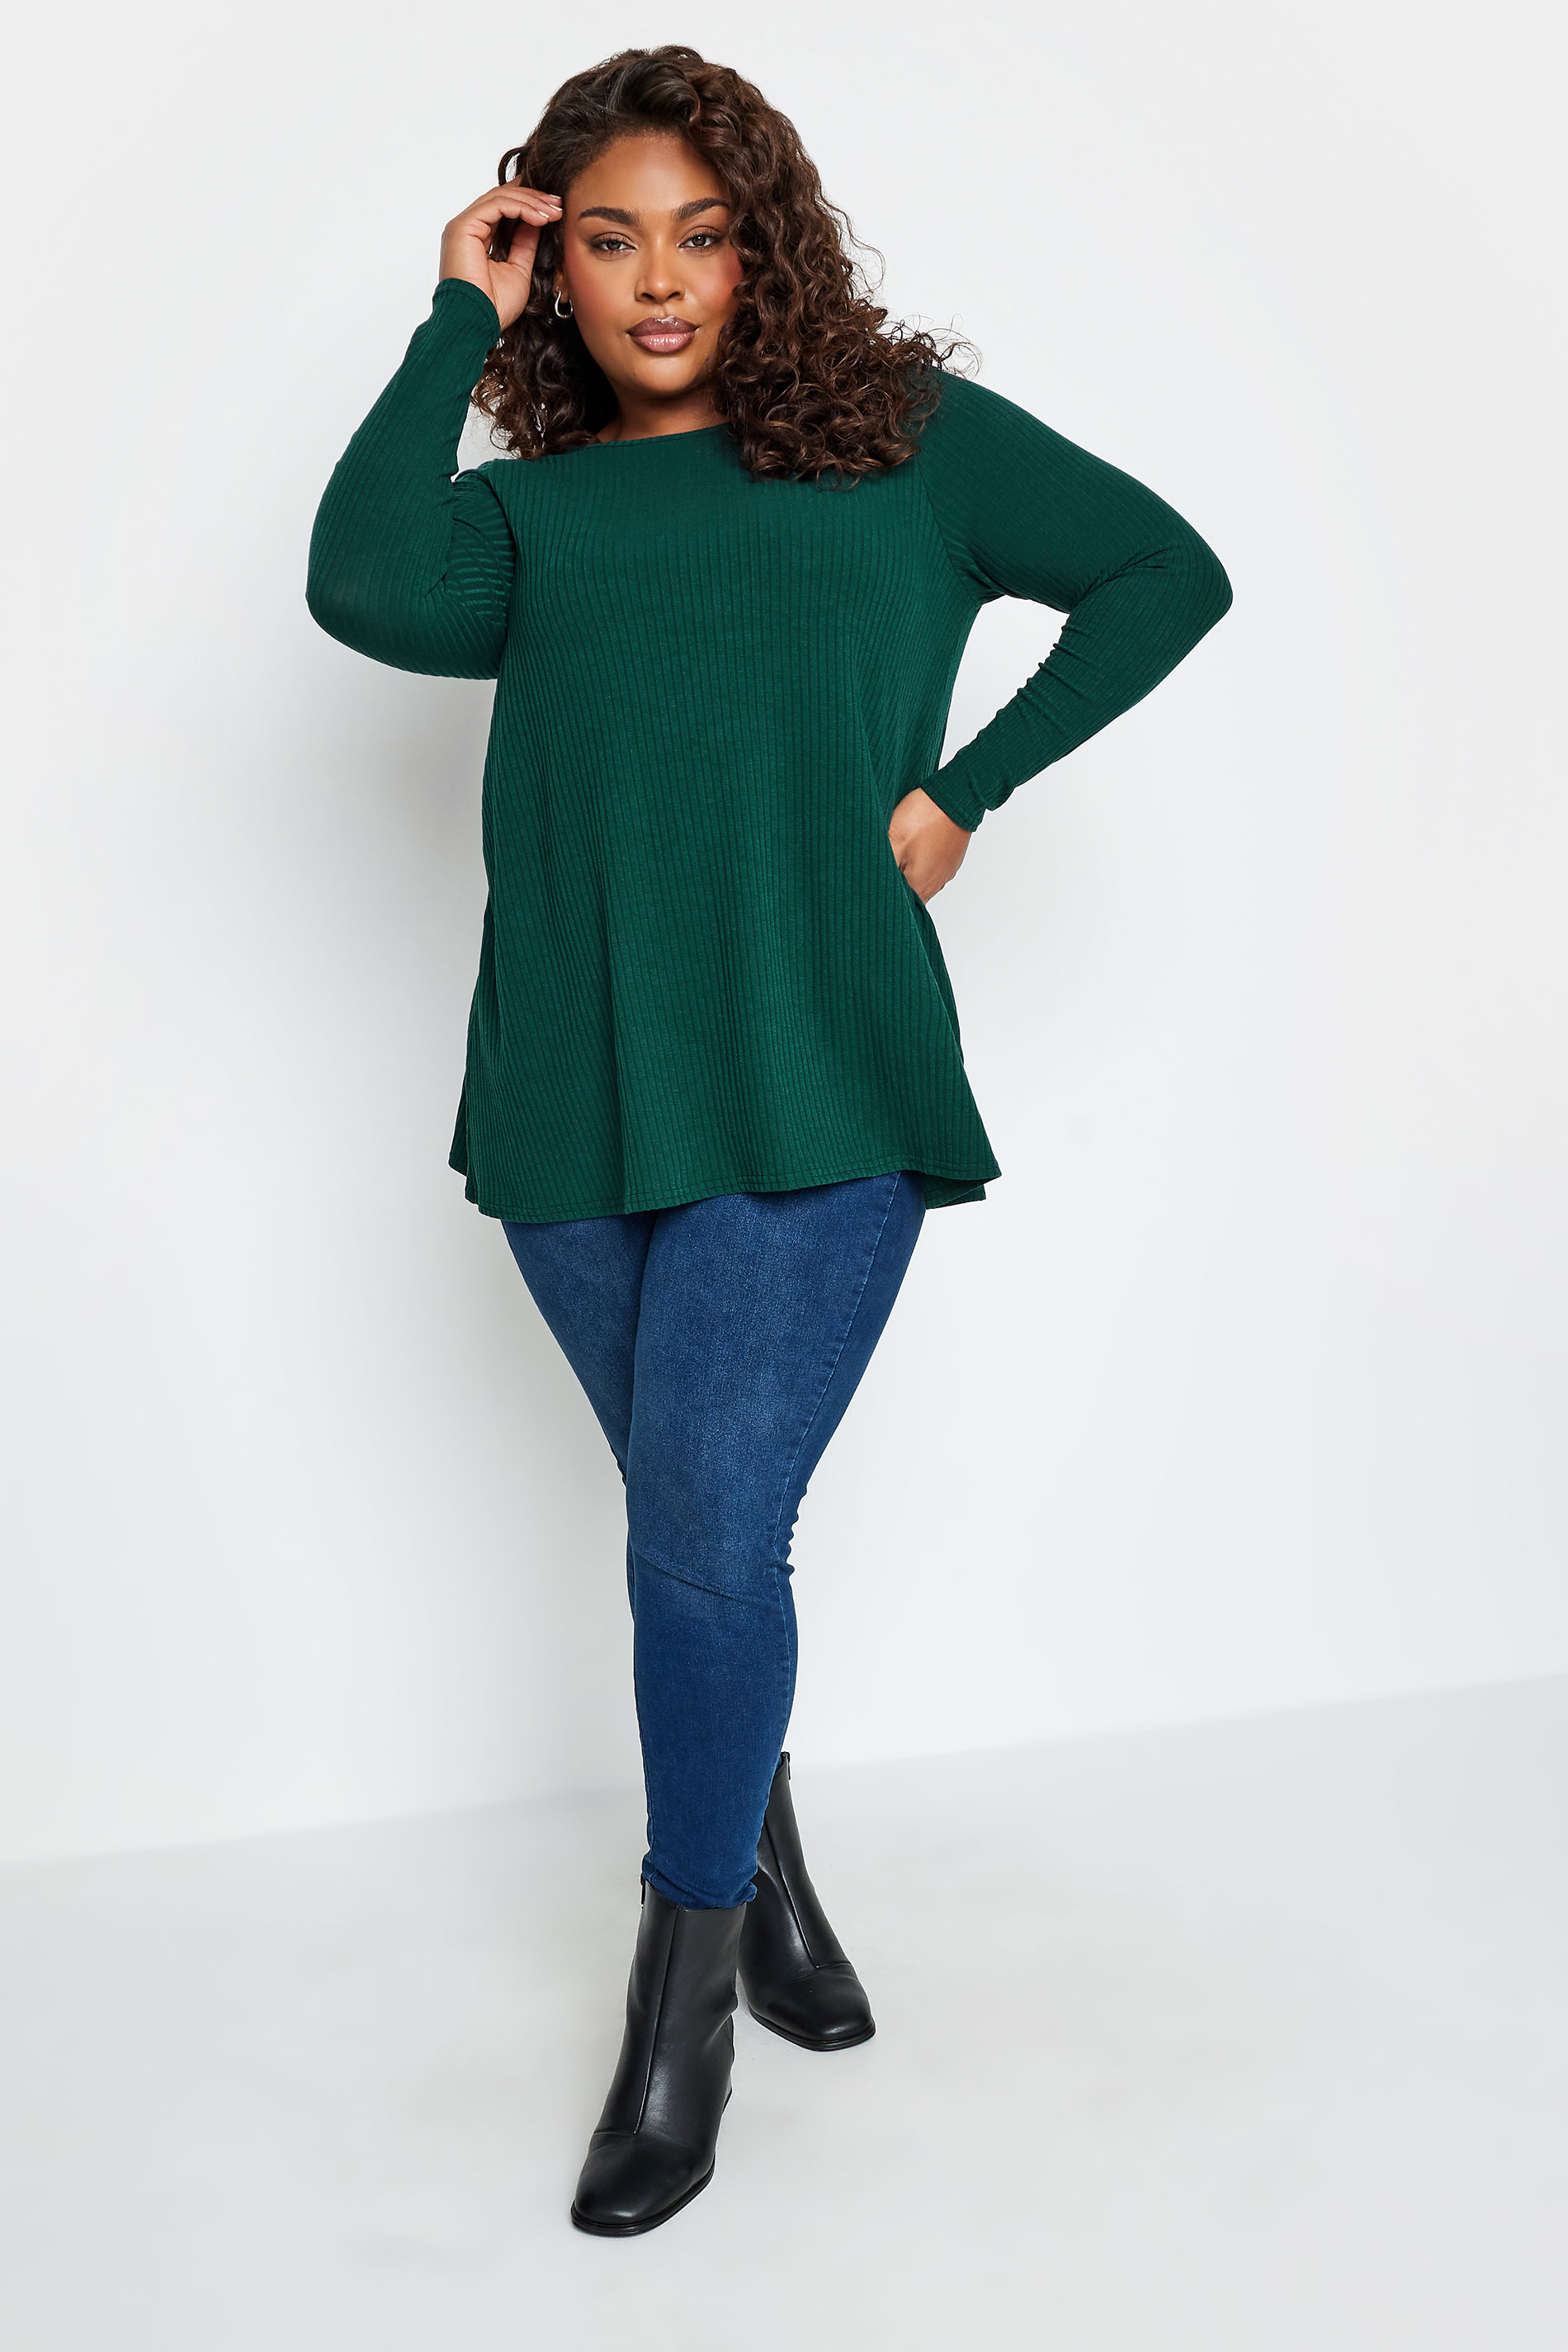 YOURS Plus Size Green Marl Long Sleeve Top